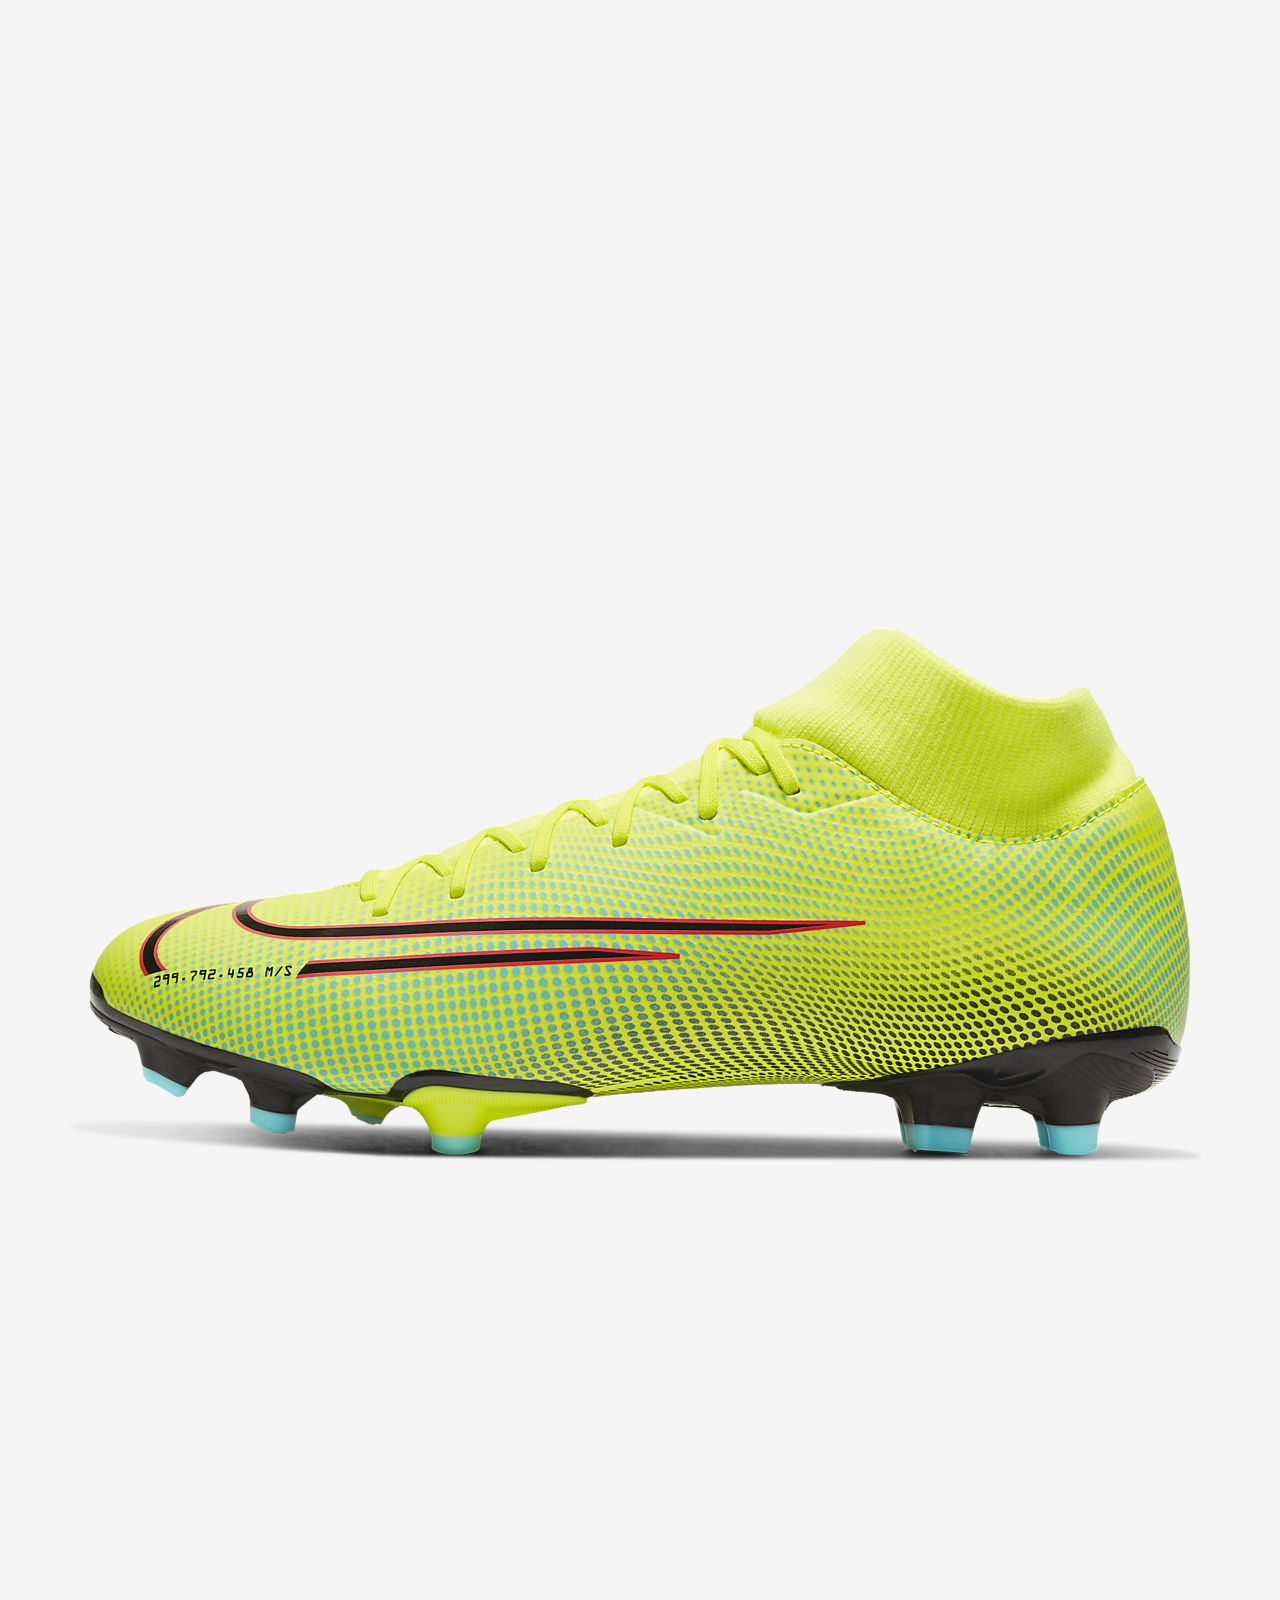 Nike Mercurial Superfly 7 Club MG Multi Ground Soccer Cleat.